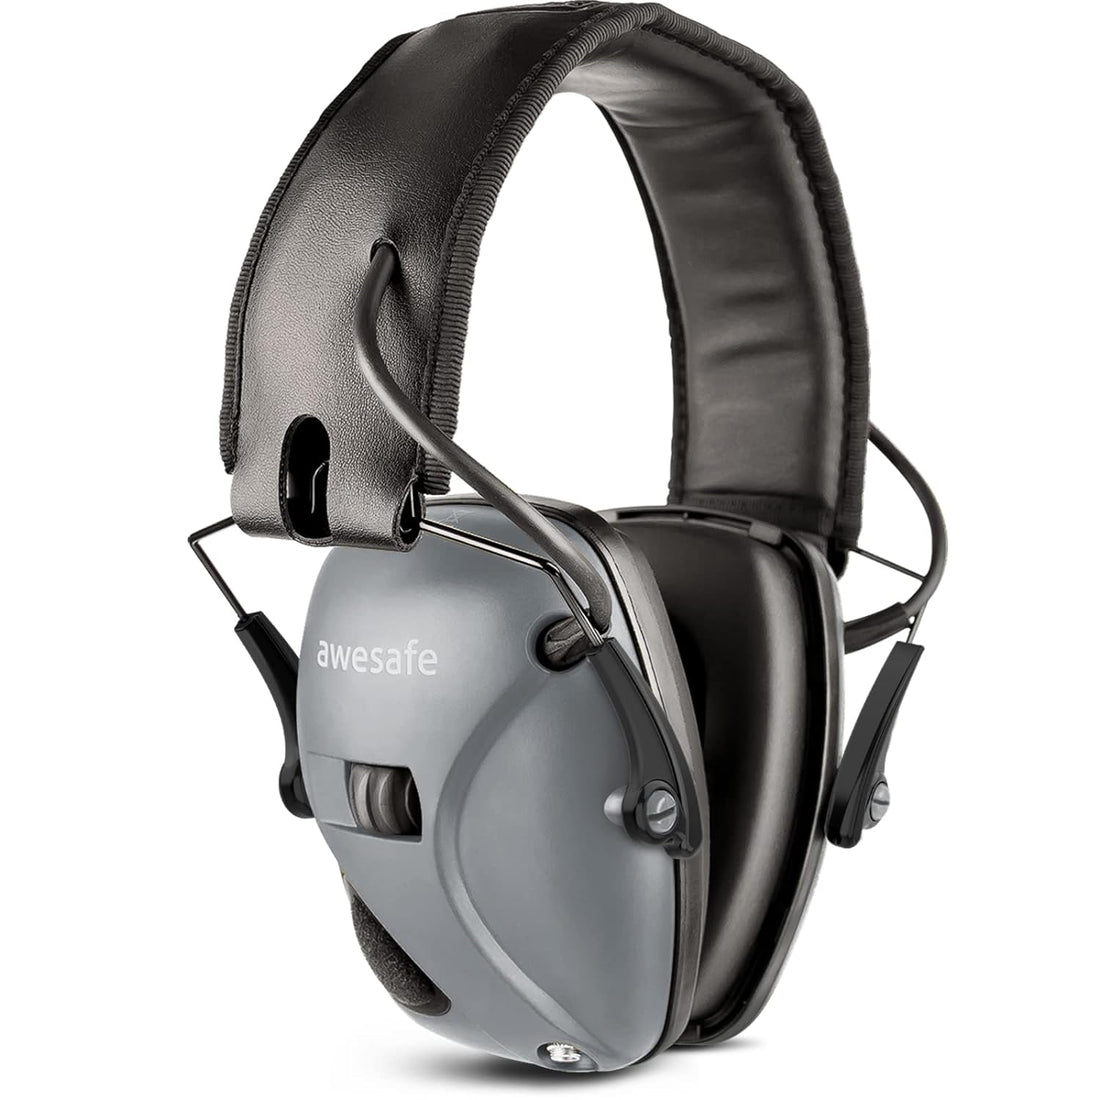 awesafe Electronic Shooting Earmuffs Hearing Protection with Noise Reduction Sound Amplification